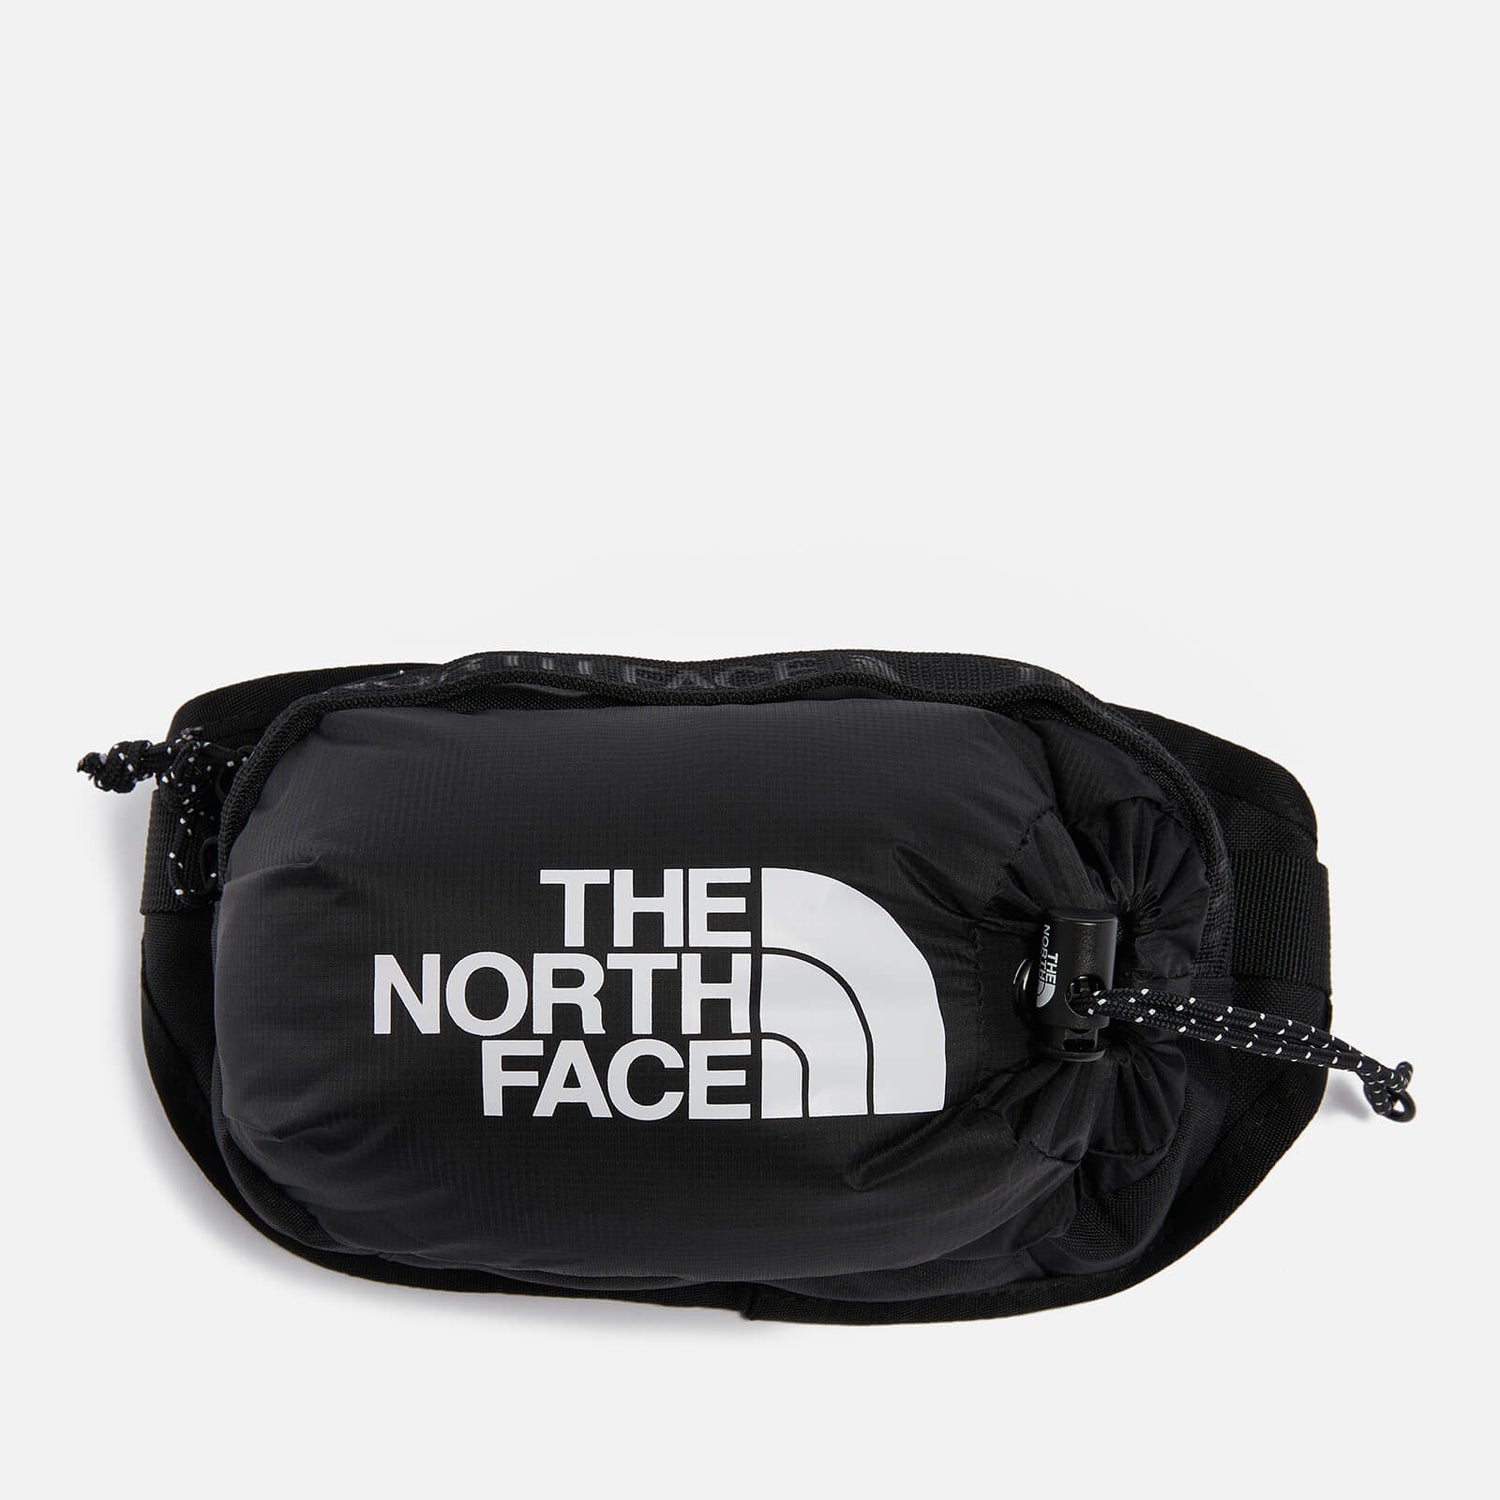 The North Face Bozer III S Ripstop Bag